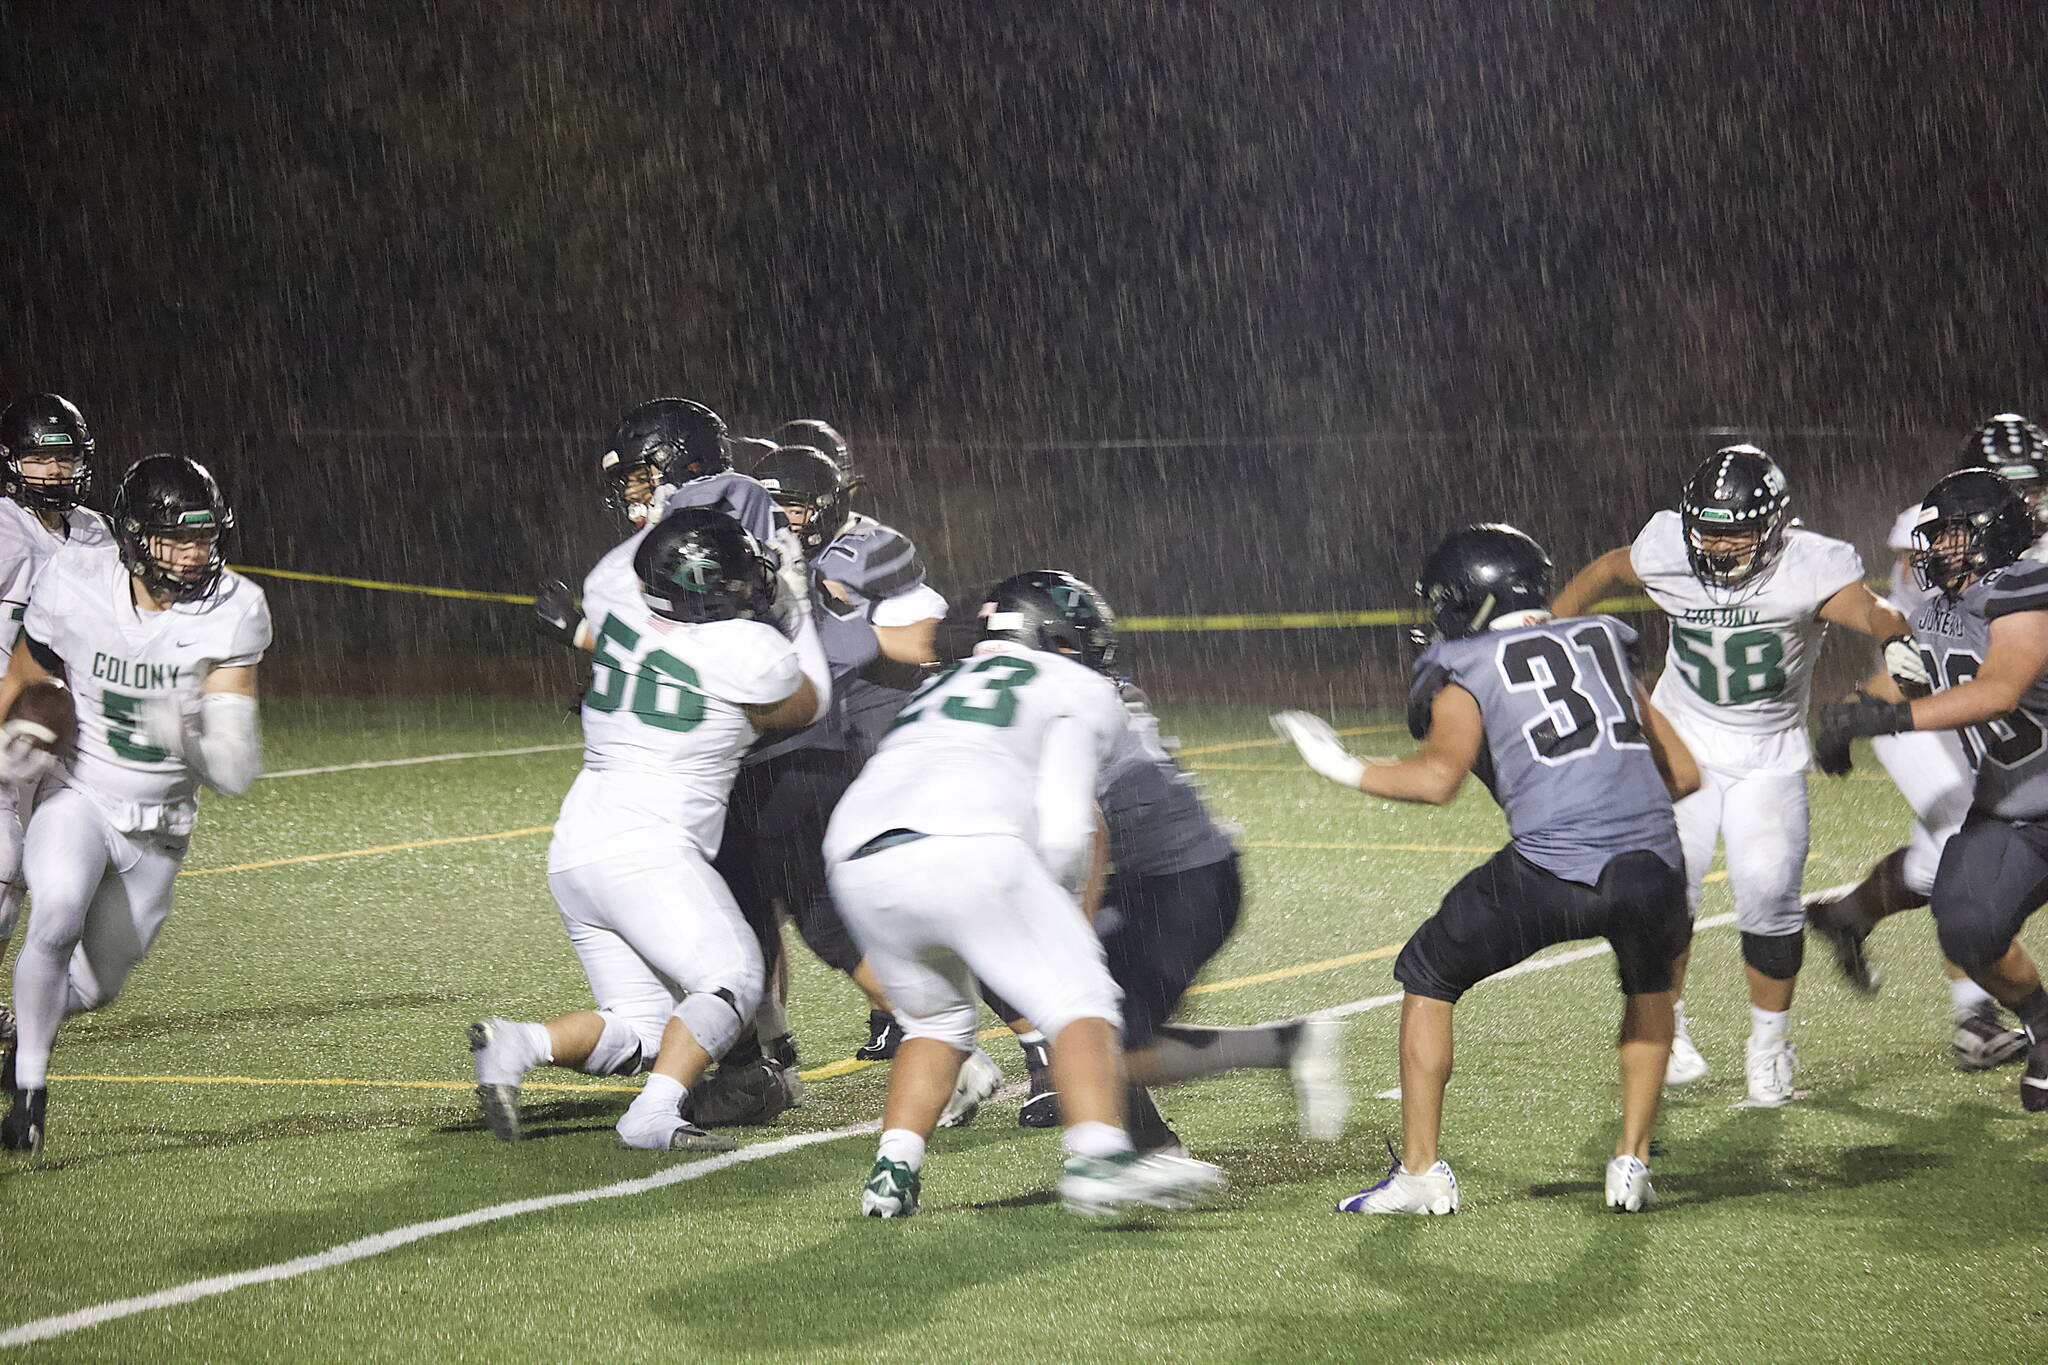 Colony High School running back Bryce Guzman (5) looks for room to run in a downpour during Friday night’s game against the Juneau Huskies at Adair-Kennedy Field. (Mark Sabbatini / Juneau Empire)